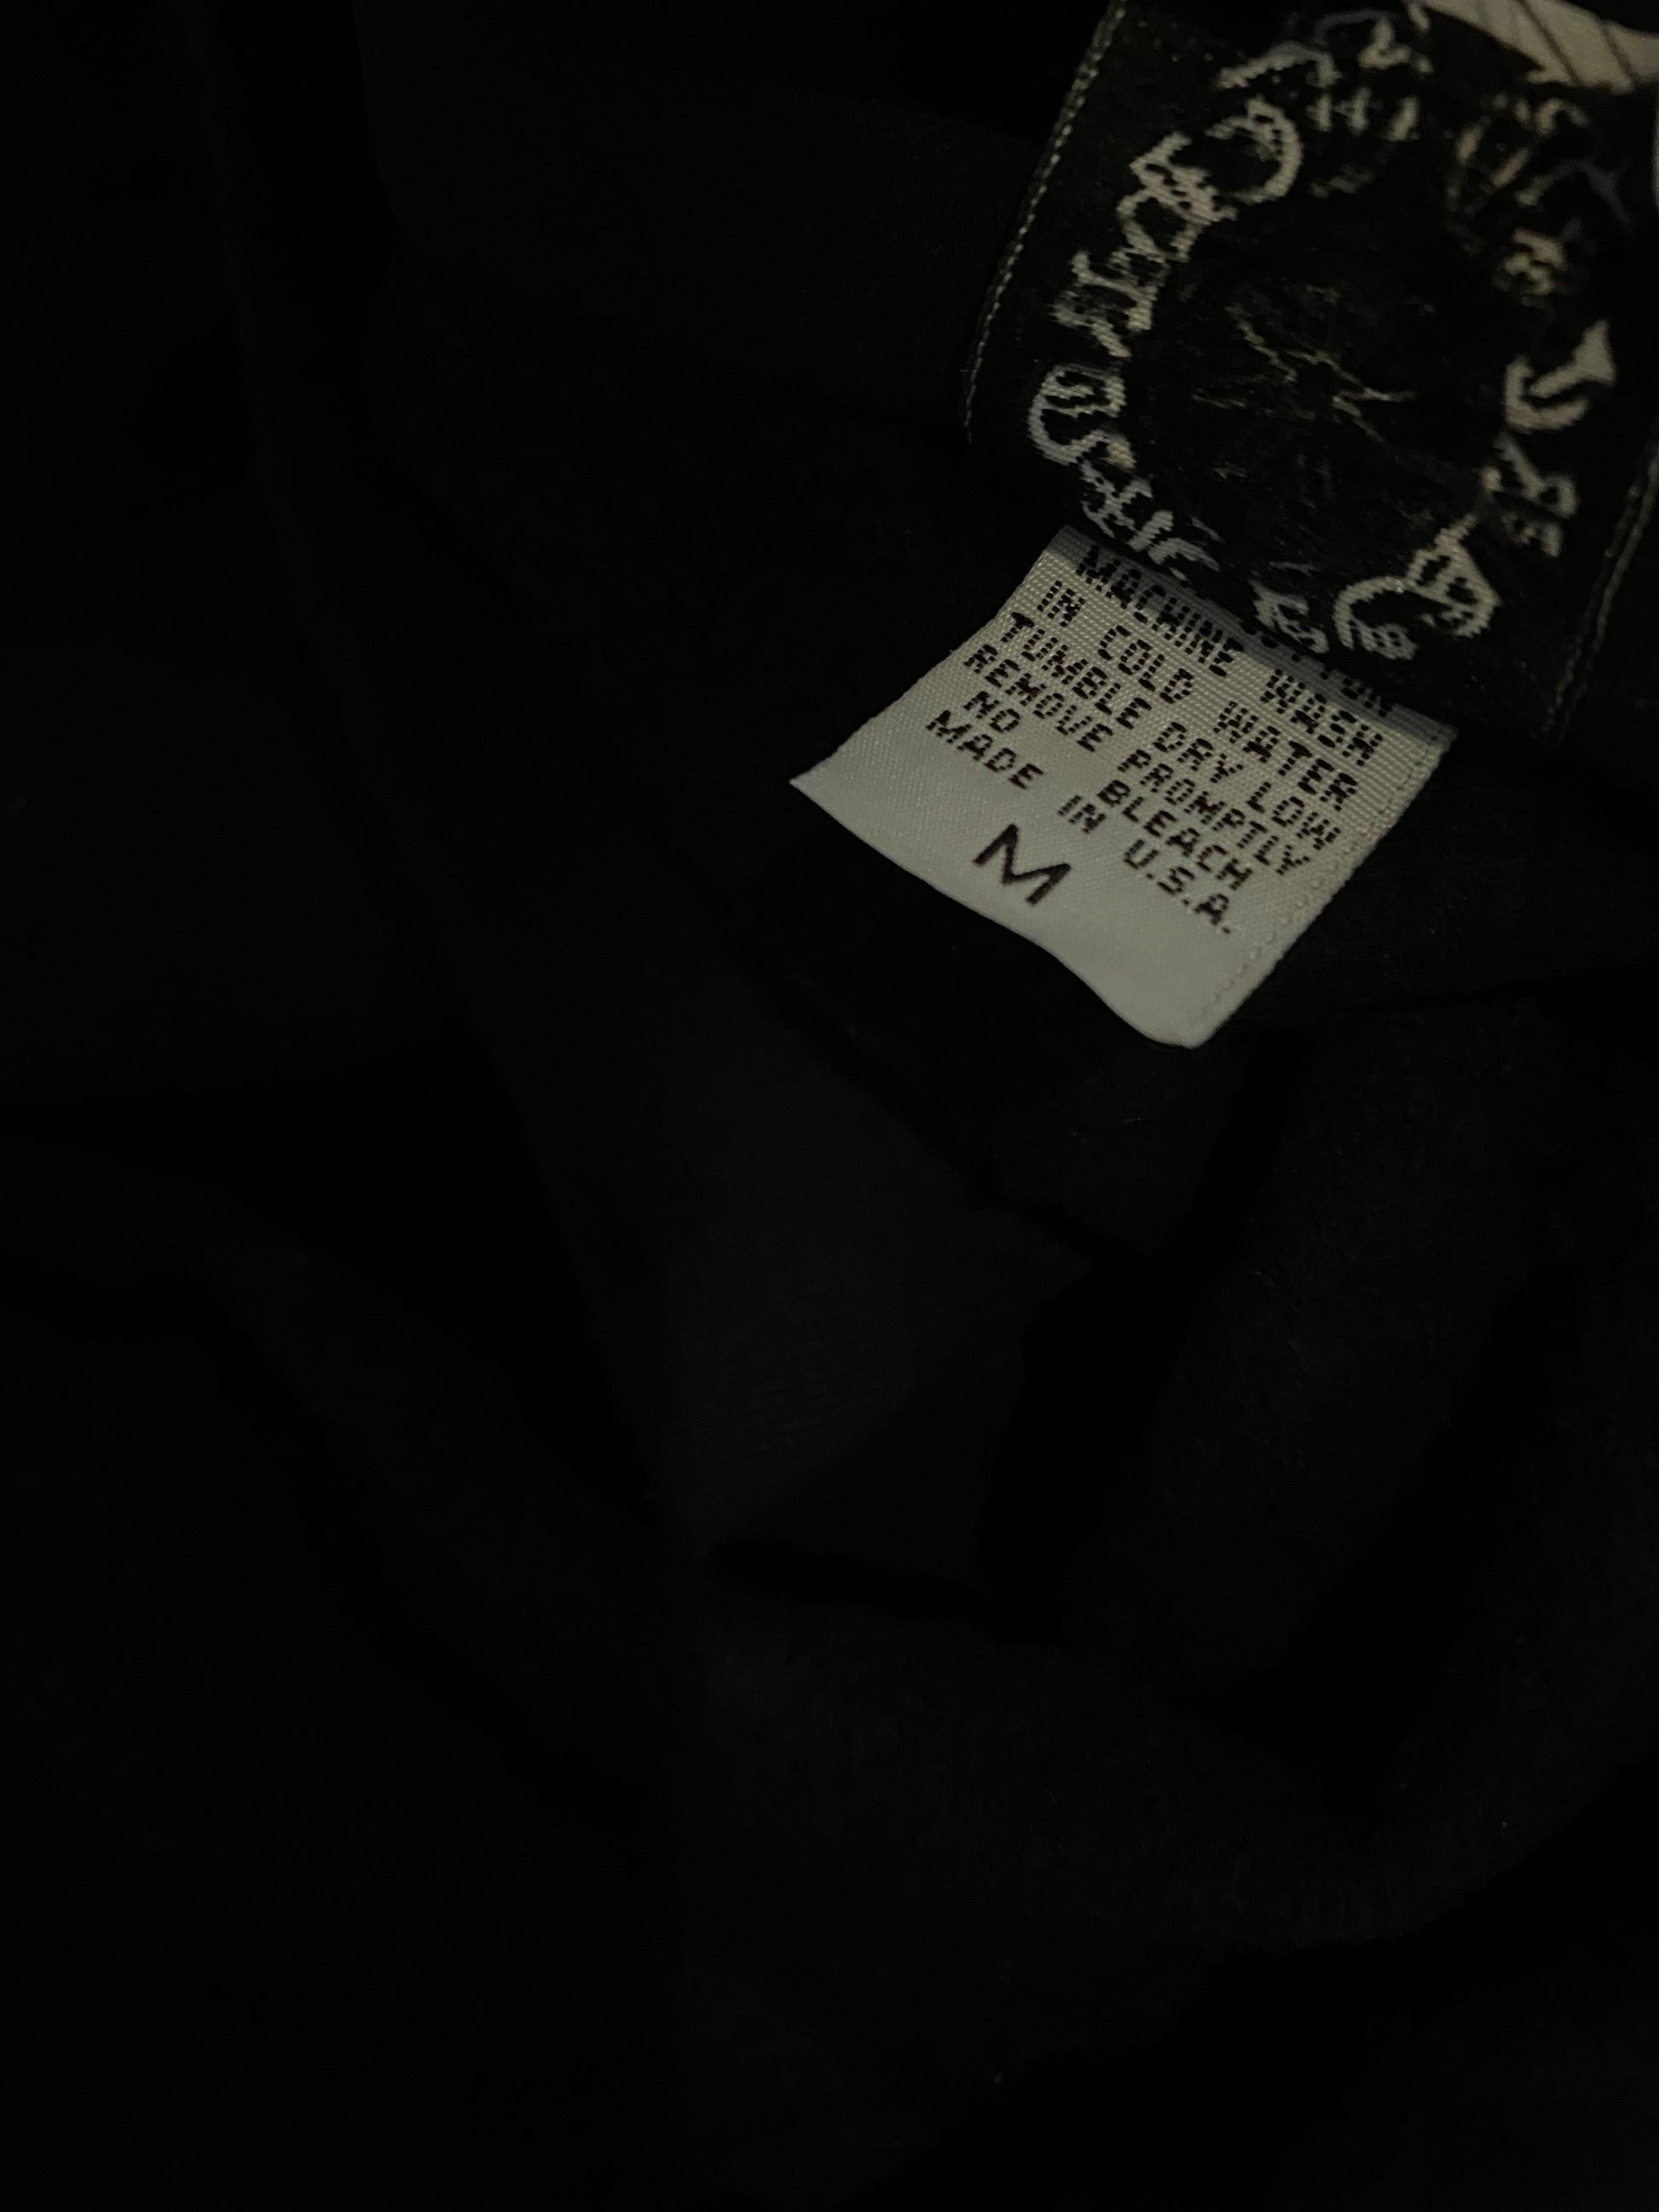 Vintage chrome hearts black “F*** you” Hoodie - Known Source